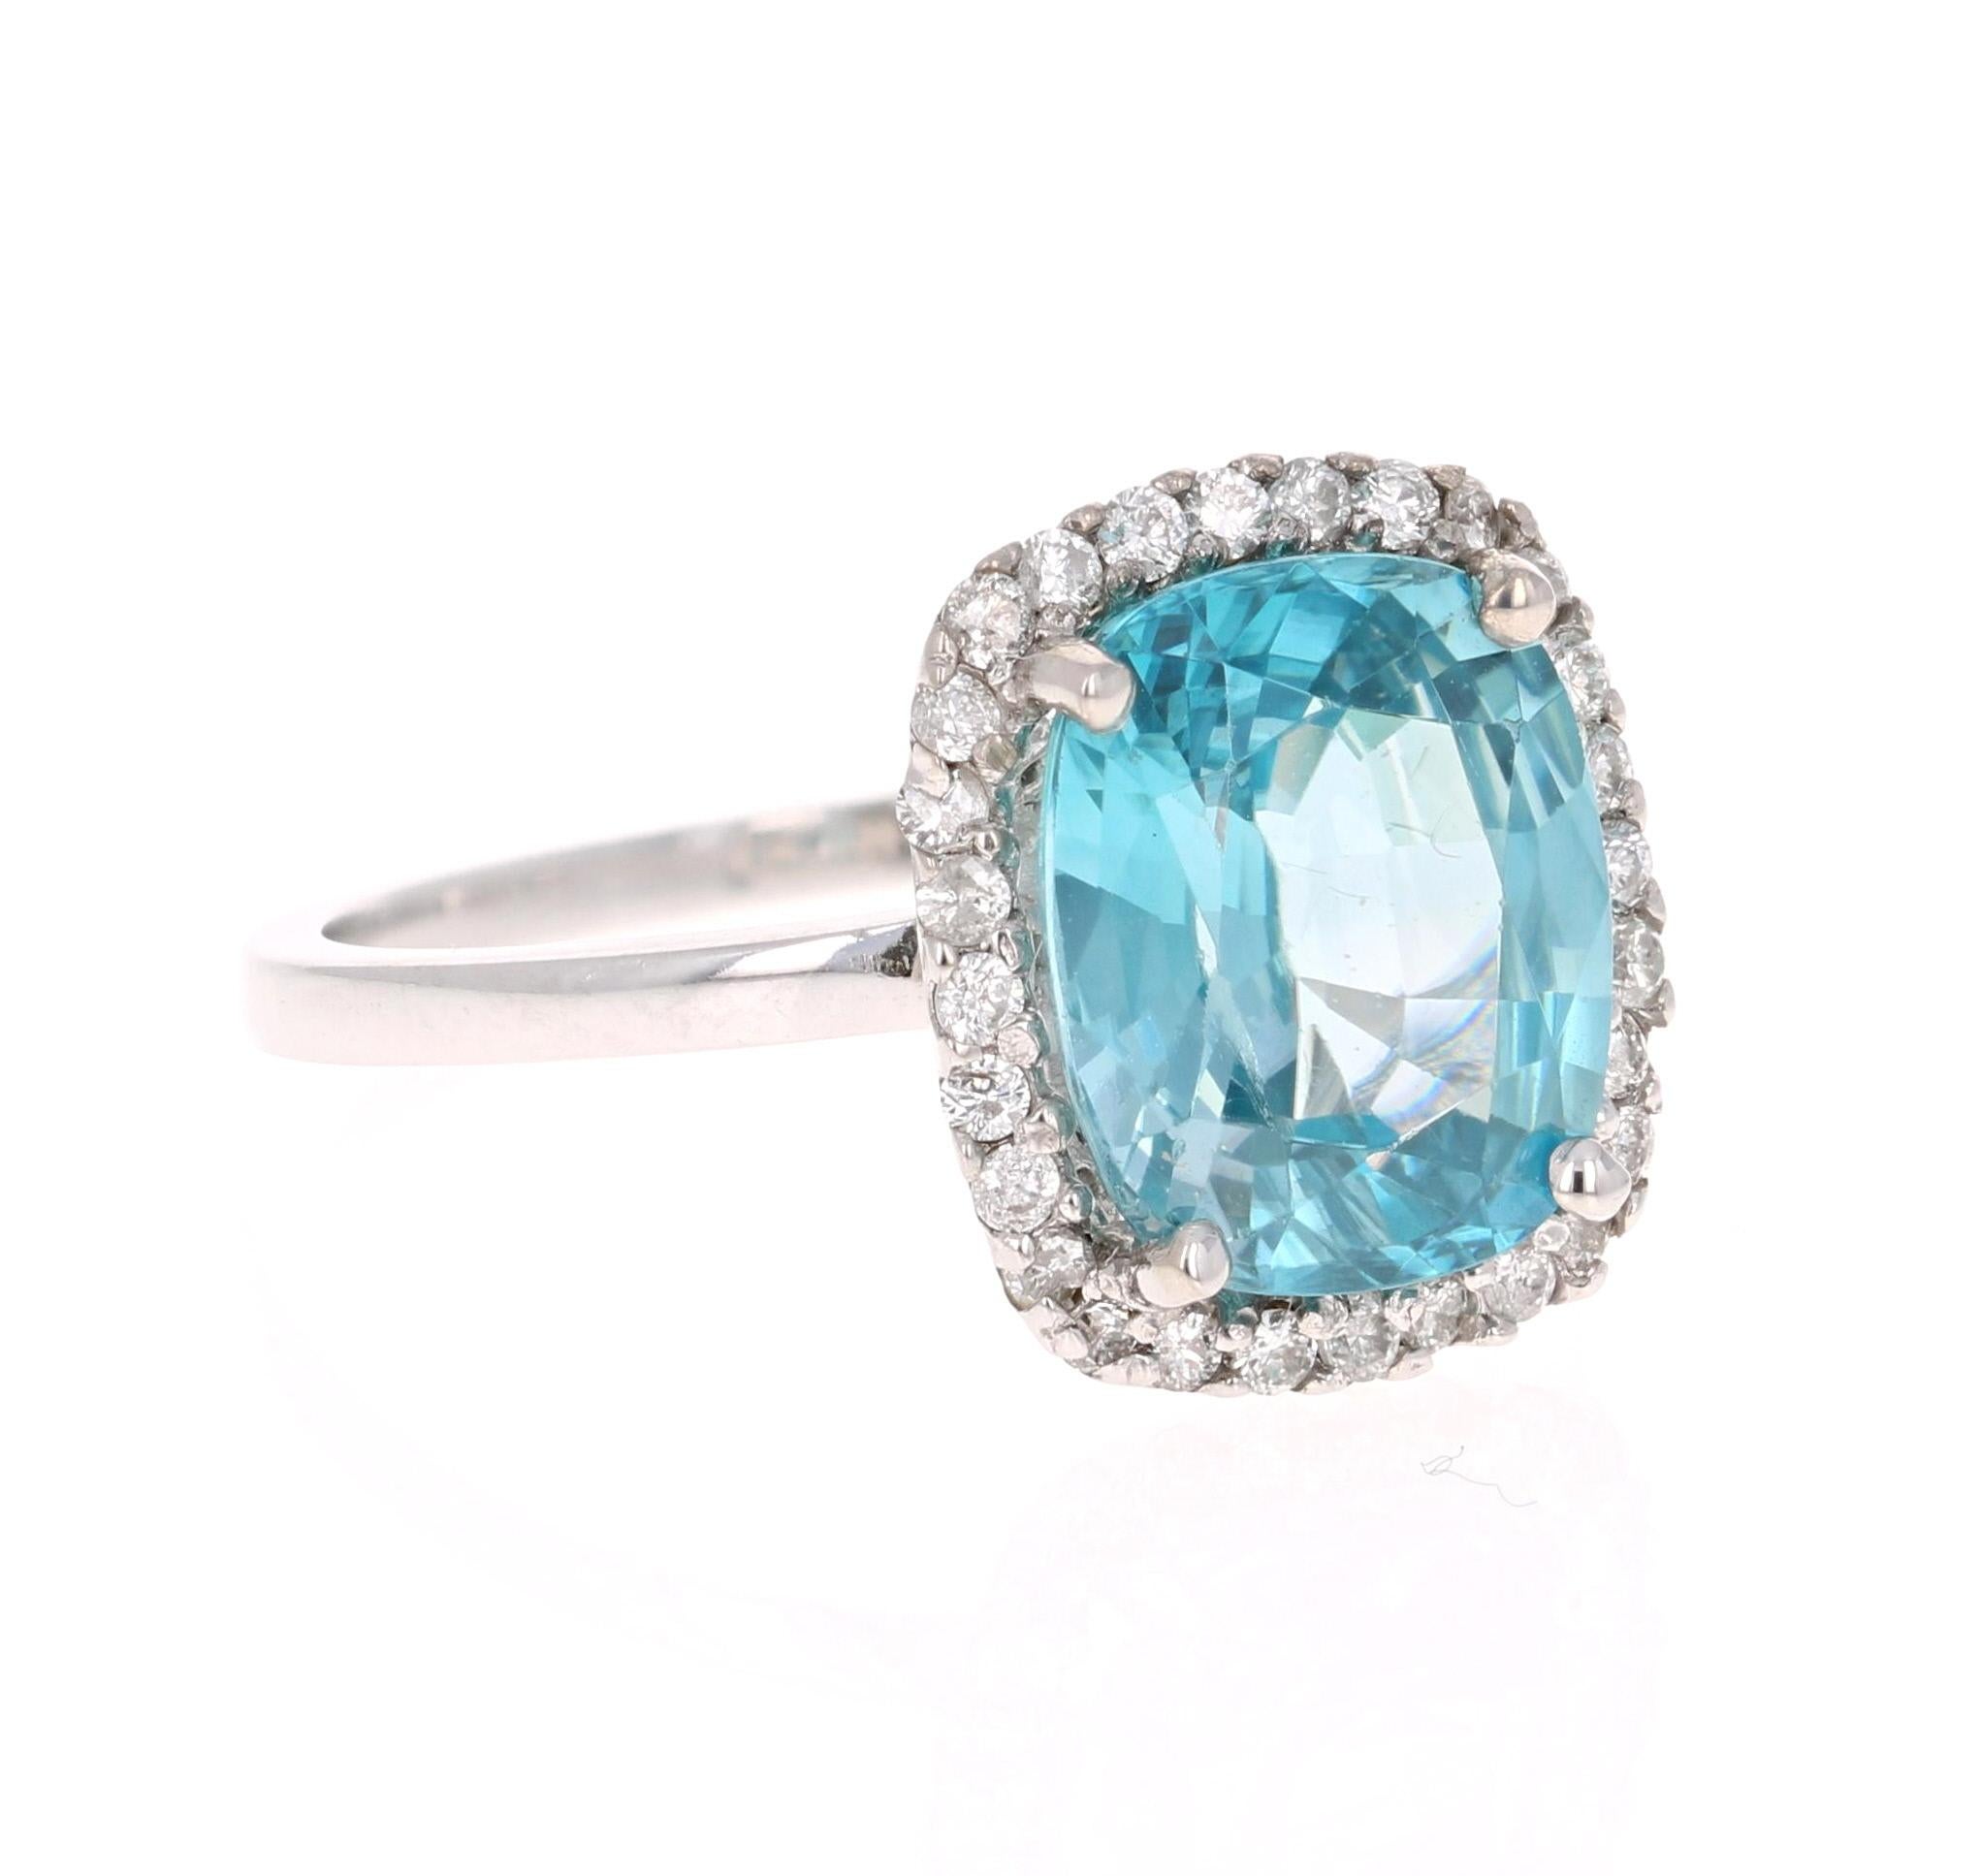 A Dazzling Blue Zircon and Diamond Ring! Blue Zircon is a natural stone mined in different parts of the world, mainly Sri Lanka, Myanmar, and Australia. 

This Cushion Cut Blue Zircon is 5.88 Carats and is surrounded by a halo of 48 Round Cut